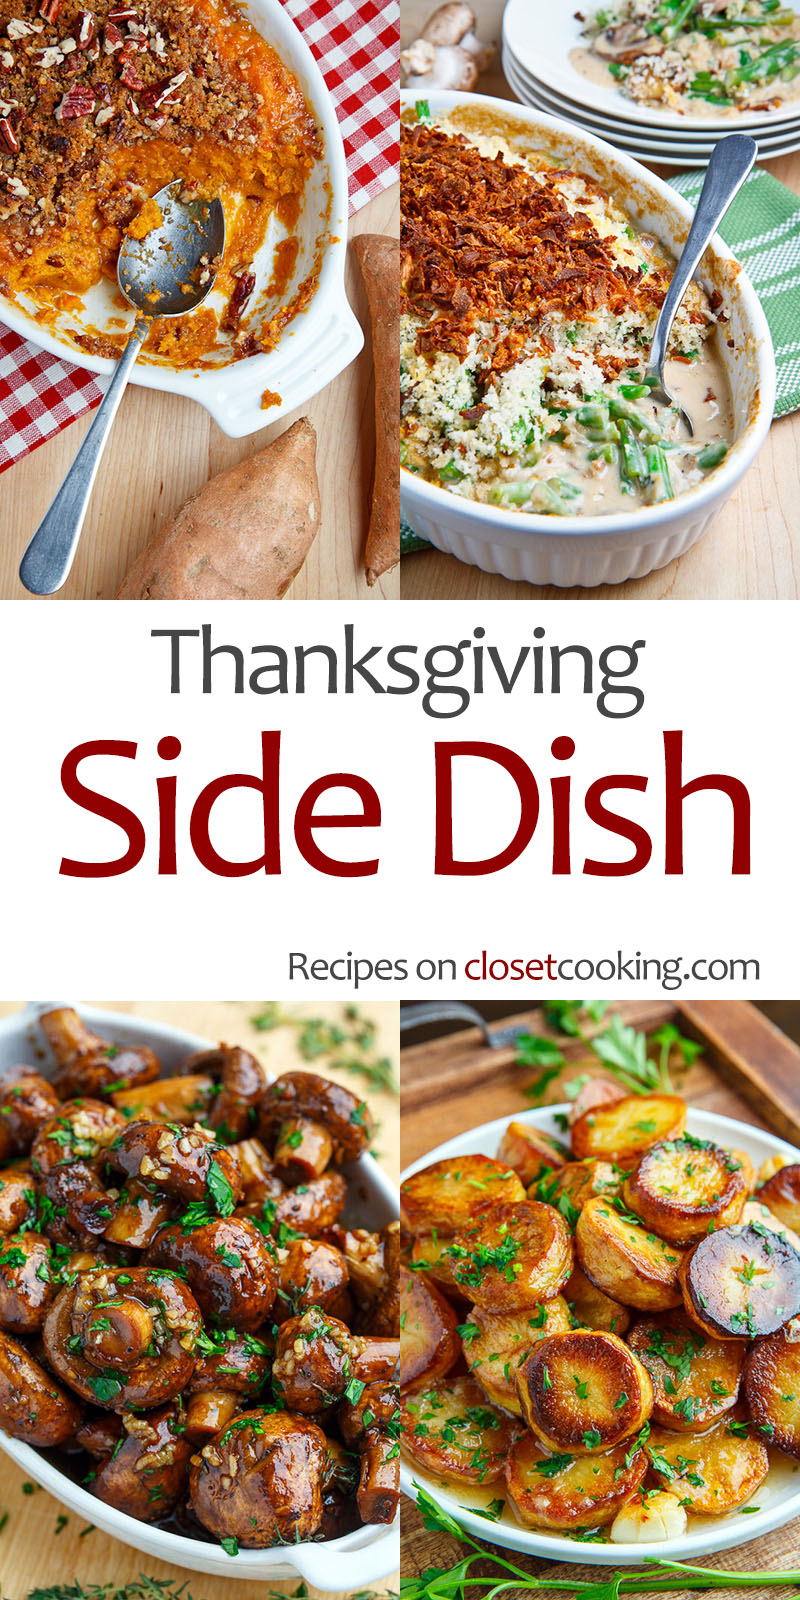 Thanksgiving Side Dish Recipes - Closet Cooking